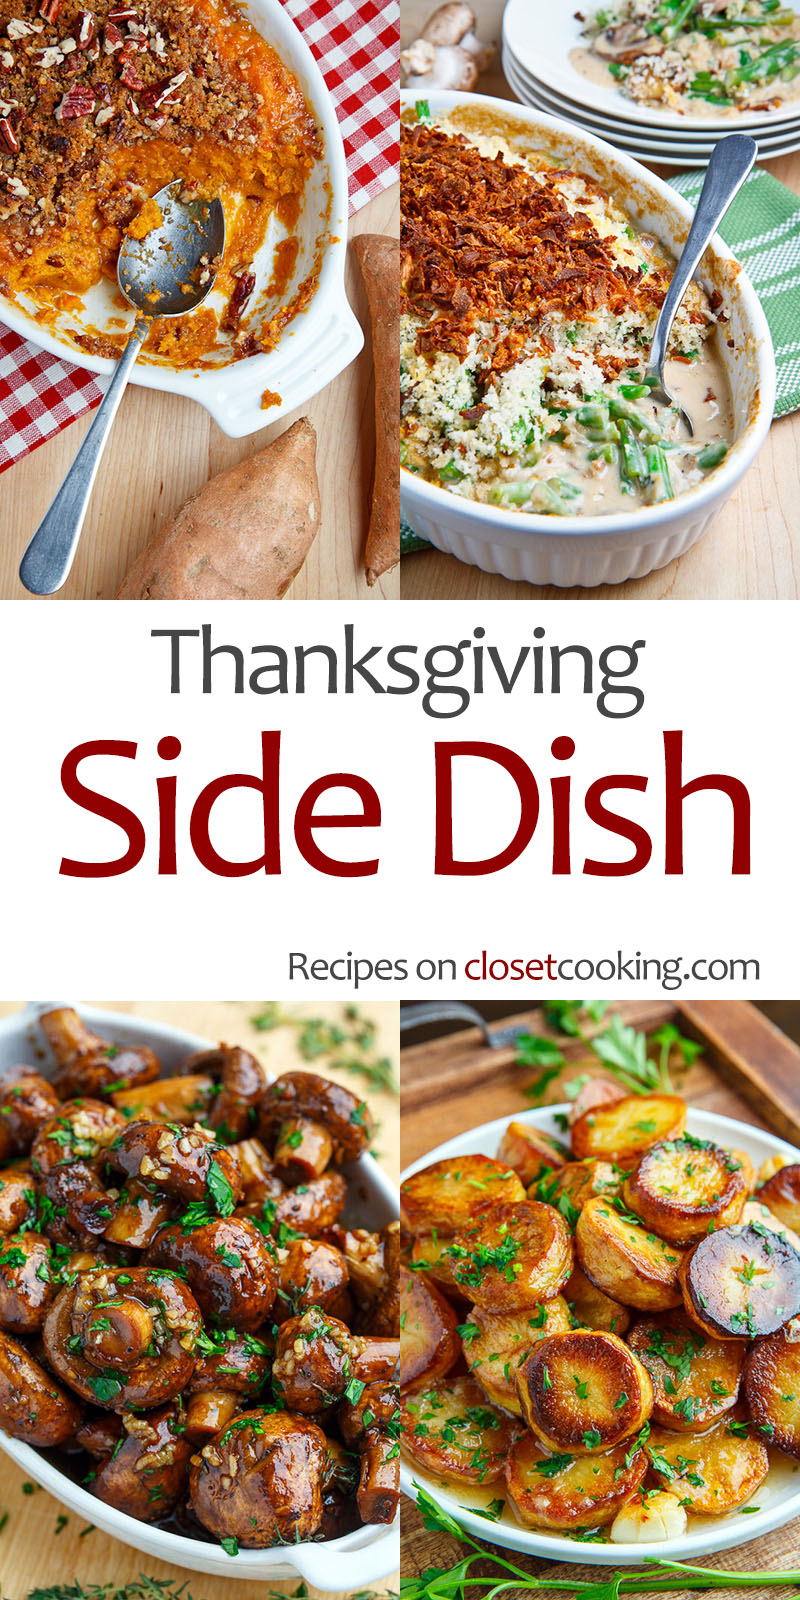 Thanksgiving Side Dish Recipes - Closet Cooking